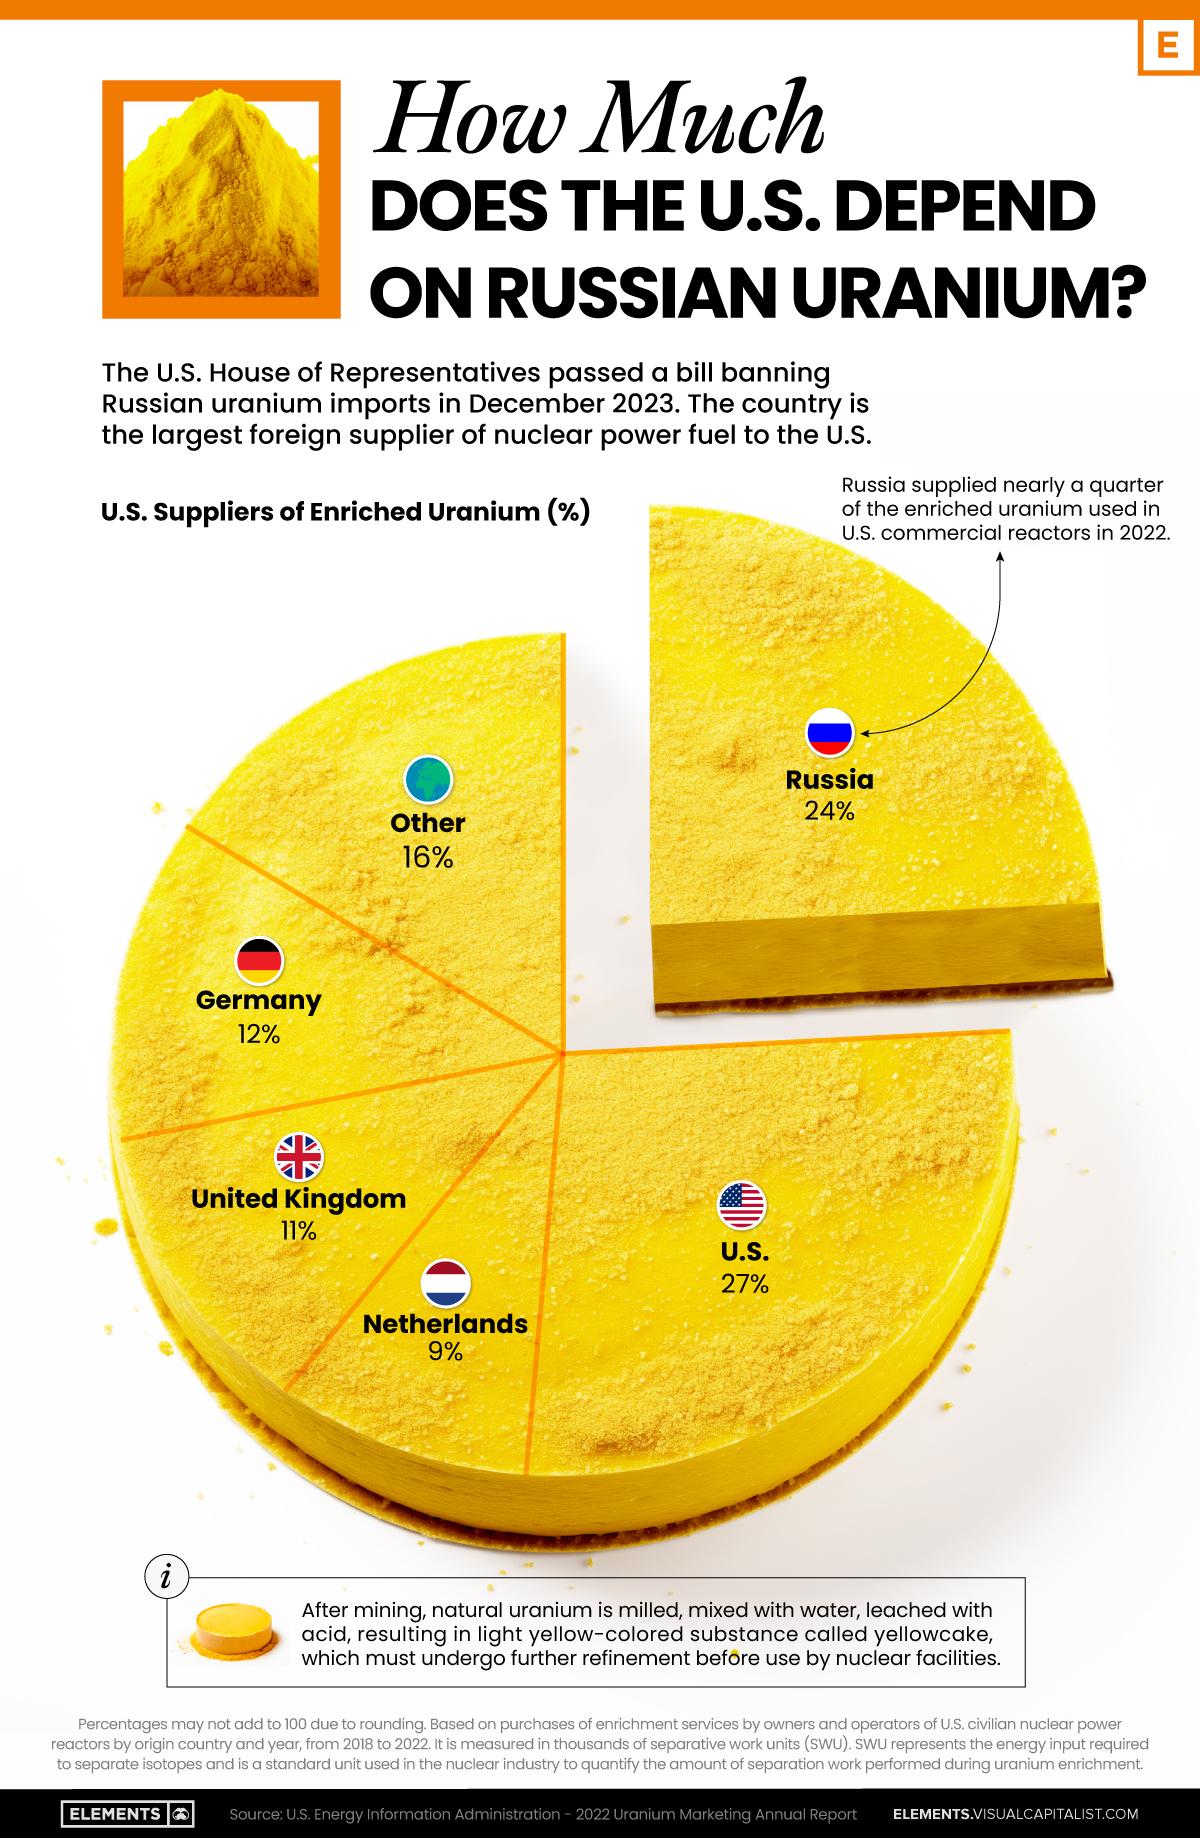 How Much Does the U.S. Depend on Russian Uranium?